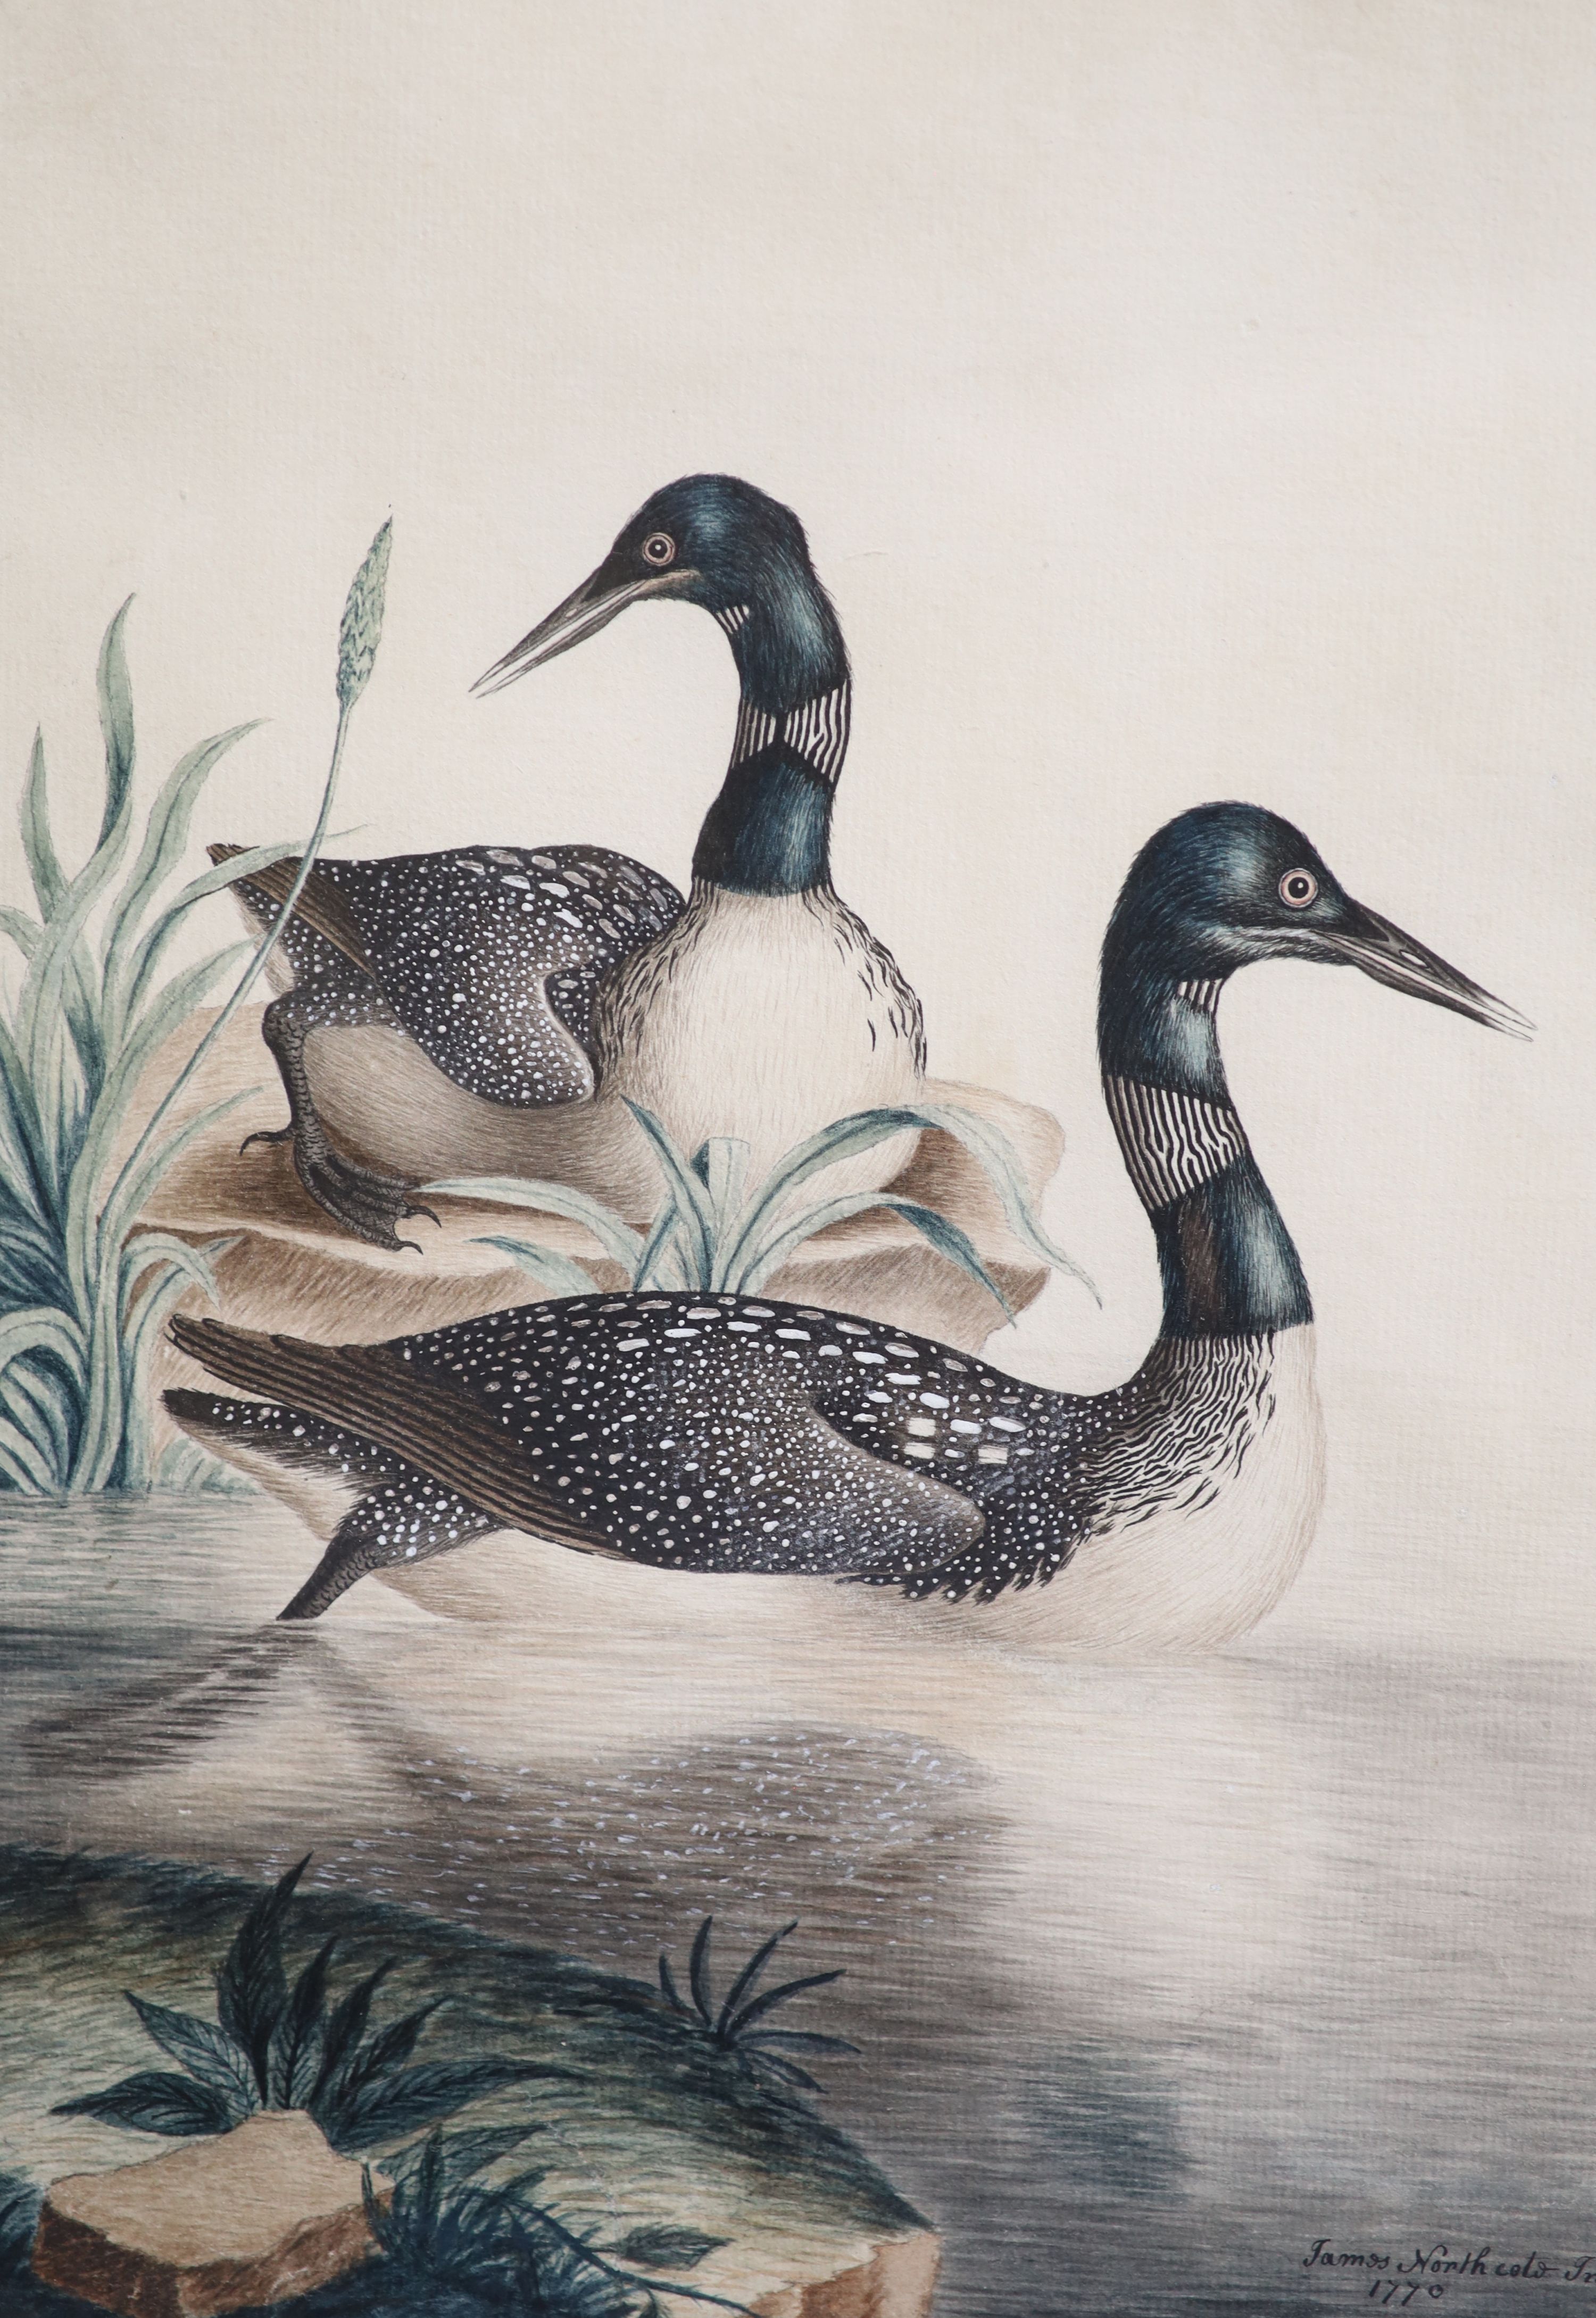 James Northcote (1746-1841), 'A pair of Great Northern Divers' and 'A Merganser perched on a rock', pair of watercolours